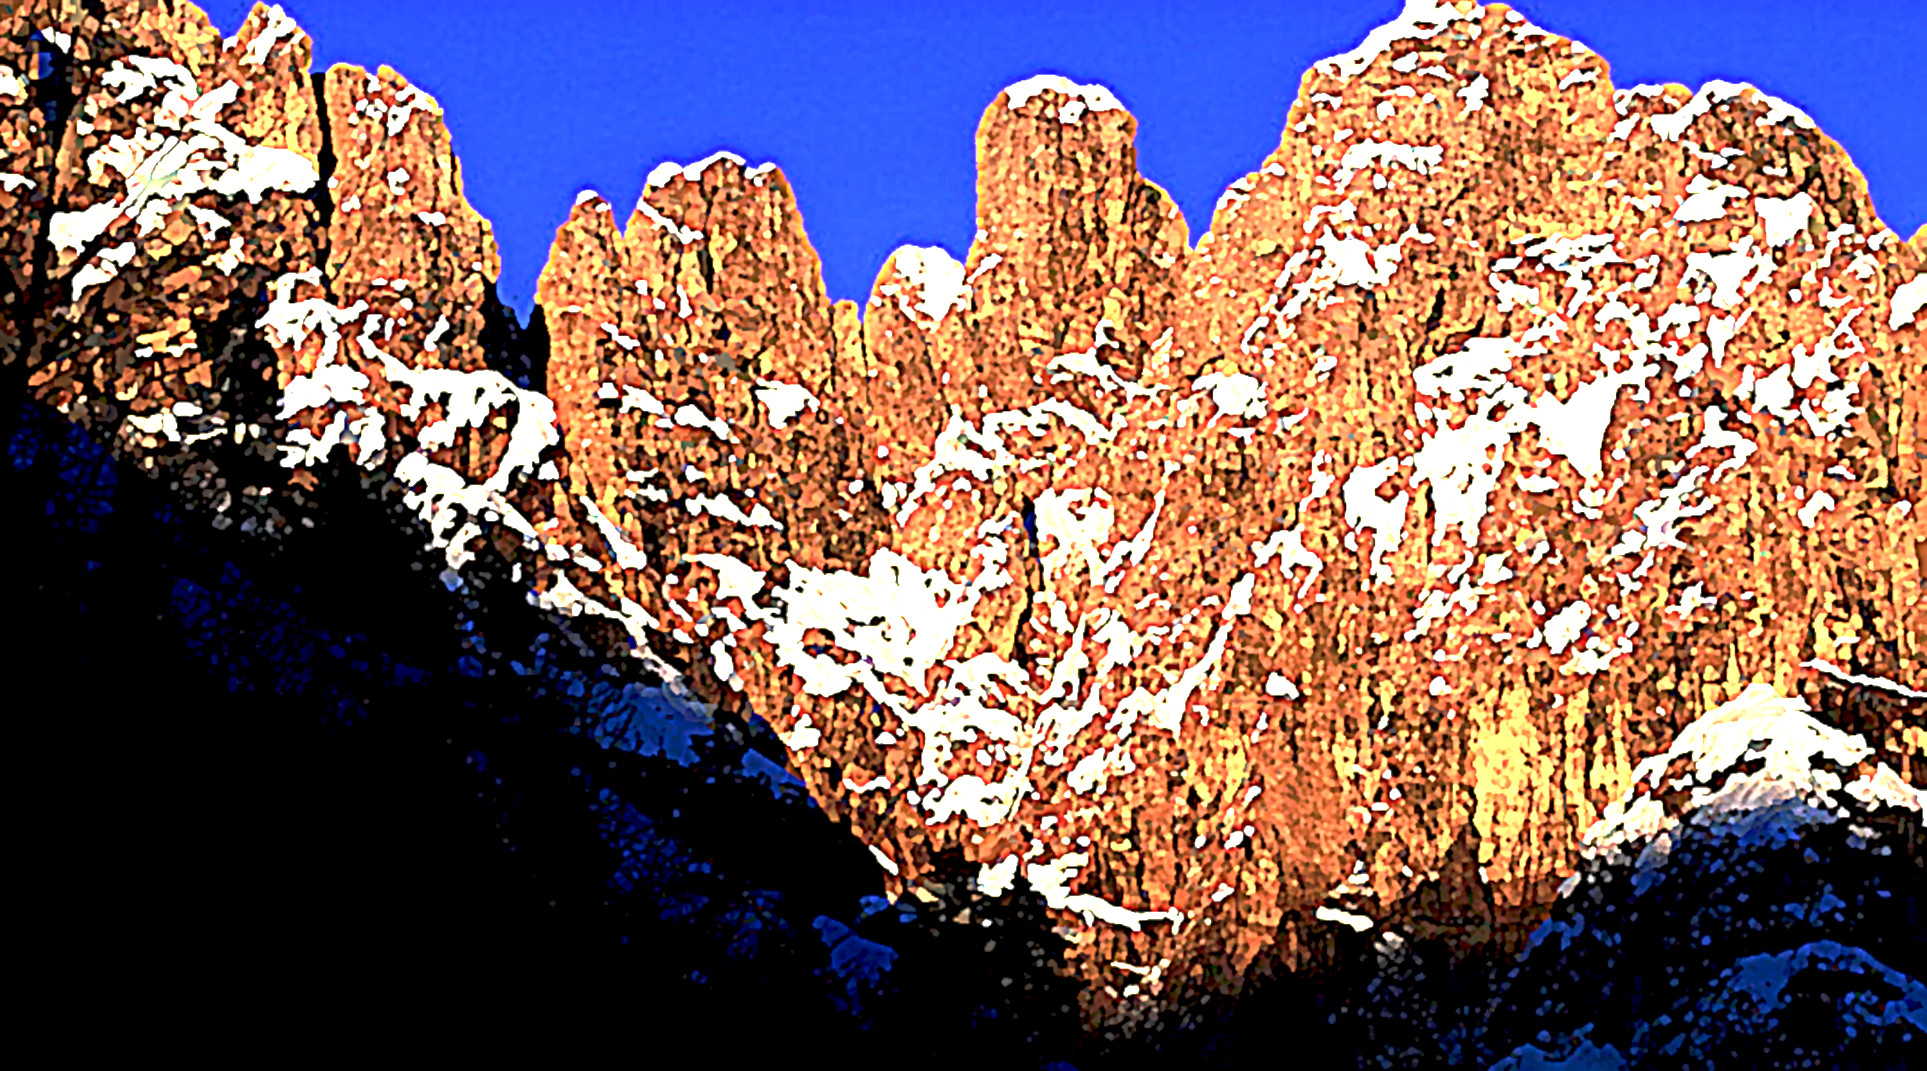 2022-02-03 17-44-51Feruch-dolomiti-800x445 with a gouache painting look (effect look regular).jpeg